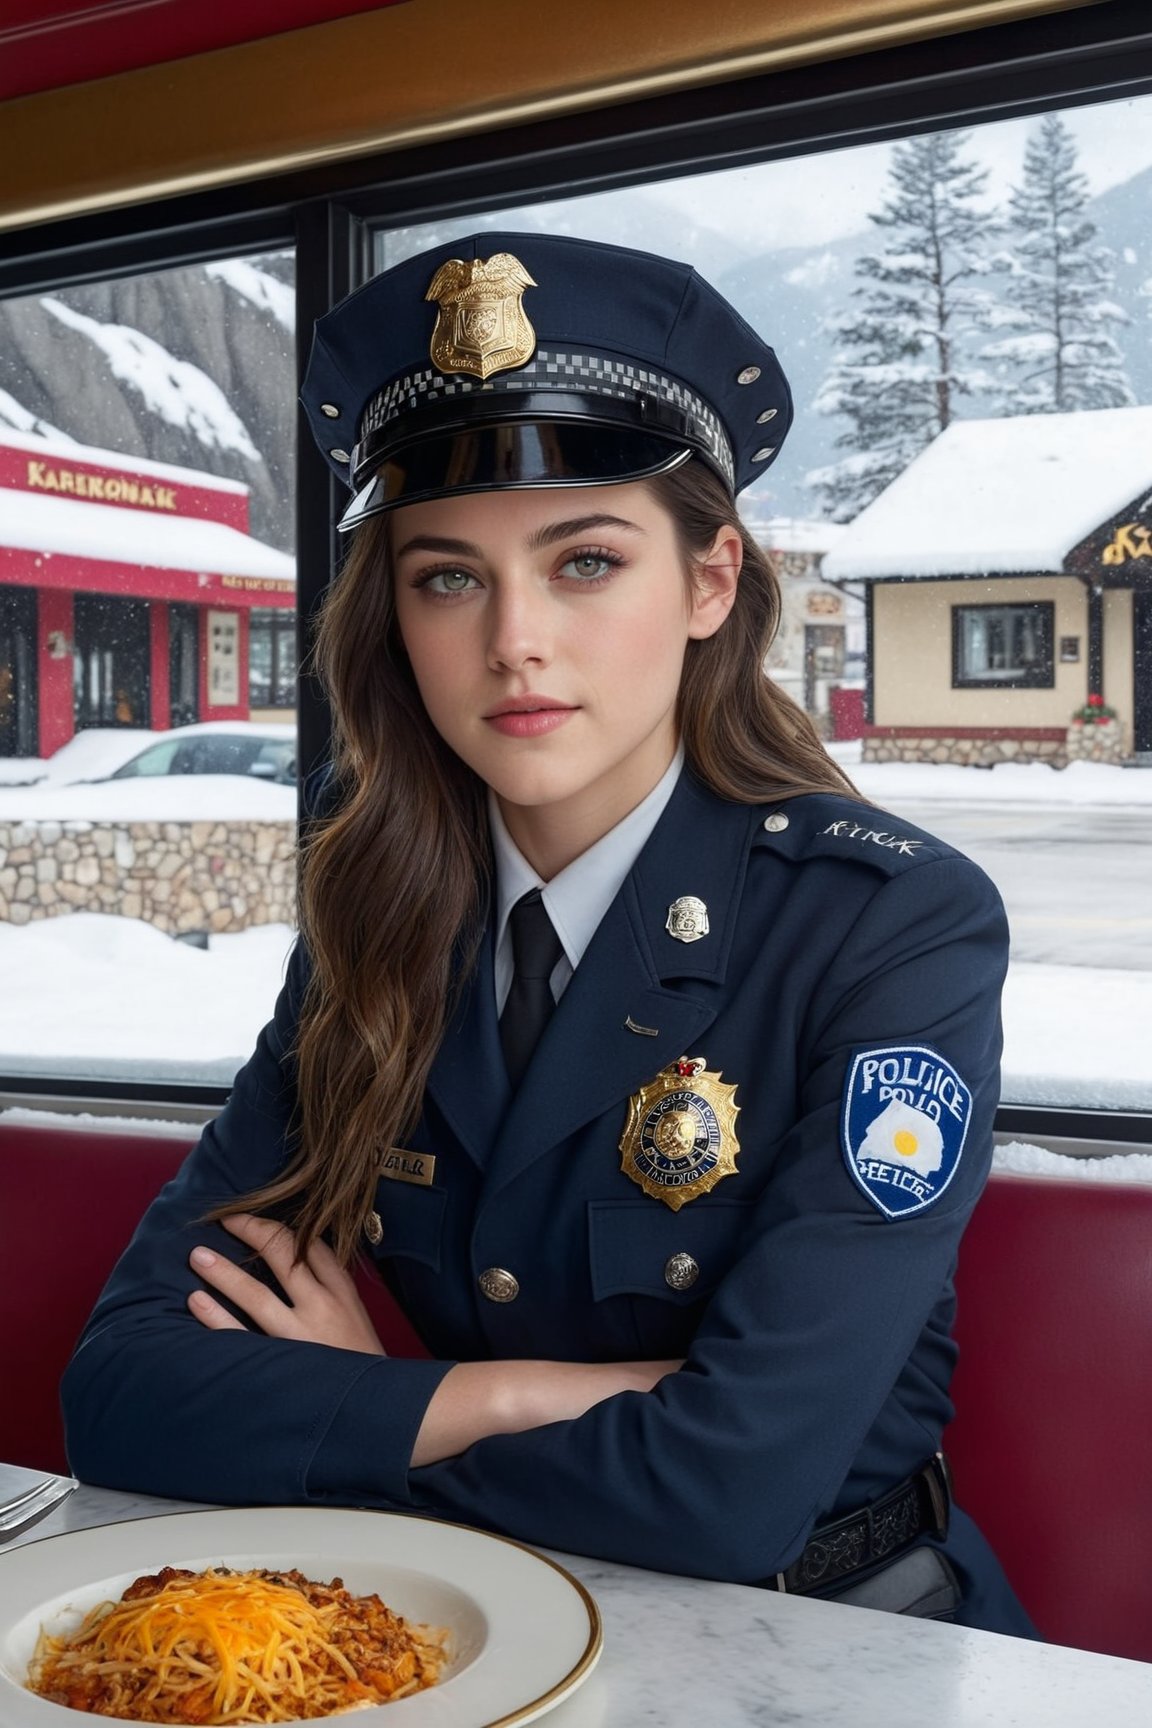 Hyper-Realistic photo of a beautiful LAPD police officer sitting in a restaurant in winter resort,20yo,1girl,solo,LAPD police uniform,cap,detailed exquisite face,soft shiny skin,smile,looking at viewer,Kristen Stewart lookalike,cap,sunglasses,fullbody:1.3
BREAK
backdrop:restaurant,window,snow,road,police car,tree,girl focus,[cluttered maximalism]
BREAK
settings: (rule of thirds1.3),perfect composition,studio photo,trending on artstation,depth of perspective,(Masterpiece,Best quality,32k,UHD:1.4),(sharp focus,high contrast,HDR,hyper-detailed,intricate details,ultra-realistic,kodachrome 800:1.3),(cinematic lighting:1.3),(by Karol Bak$,Alessandro Pautasso$,Gustav Klimt$ and Hayao Miyazaki$:1.3),art_booster,photo_b00ster, real_booster,w1nter res0rt